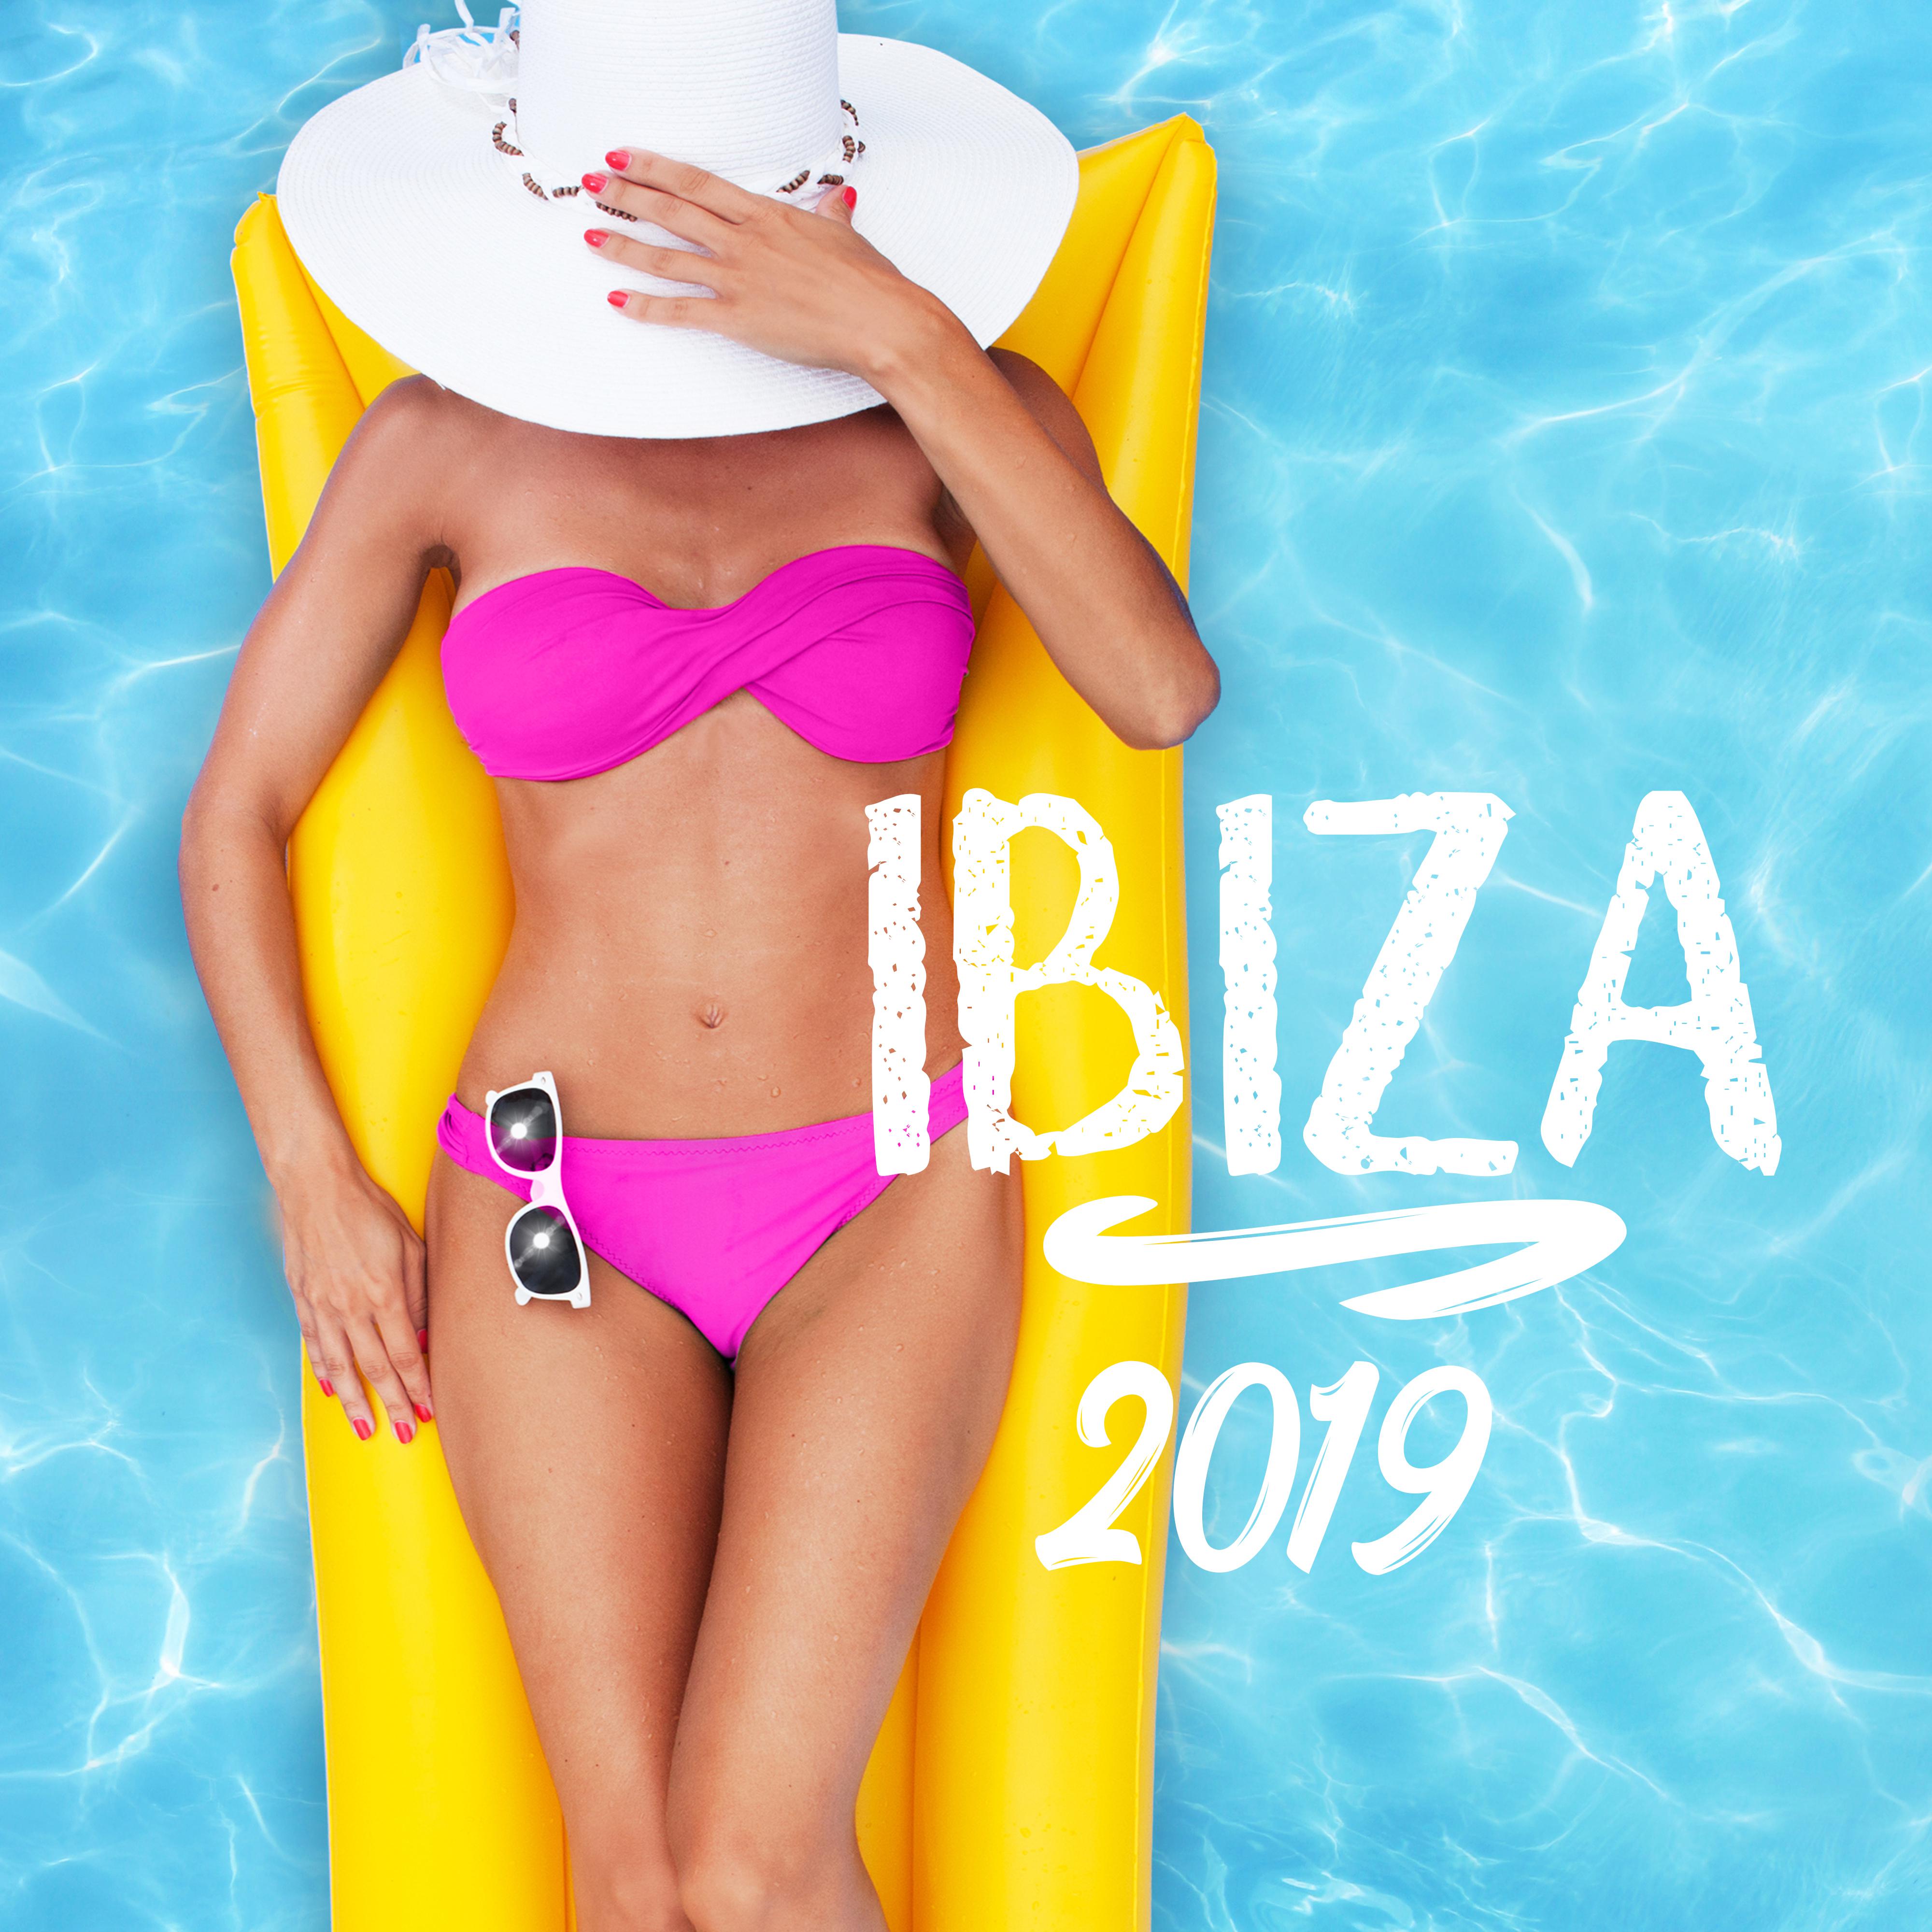 Ibiza 2019: Summer Music, Chill Out 2019, Ibiza Chilled MIX, Relax, Summer Mood, Beach Bar Party, Lounge